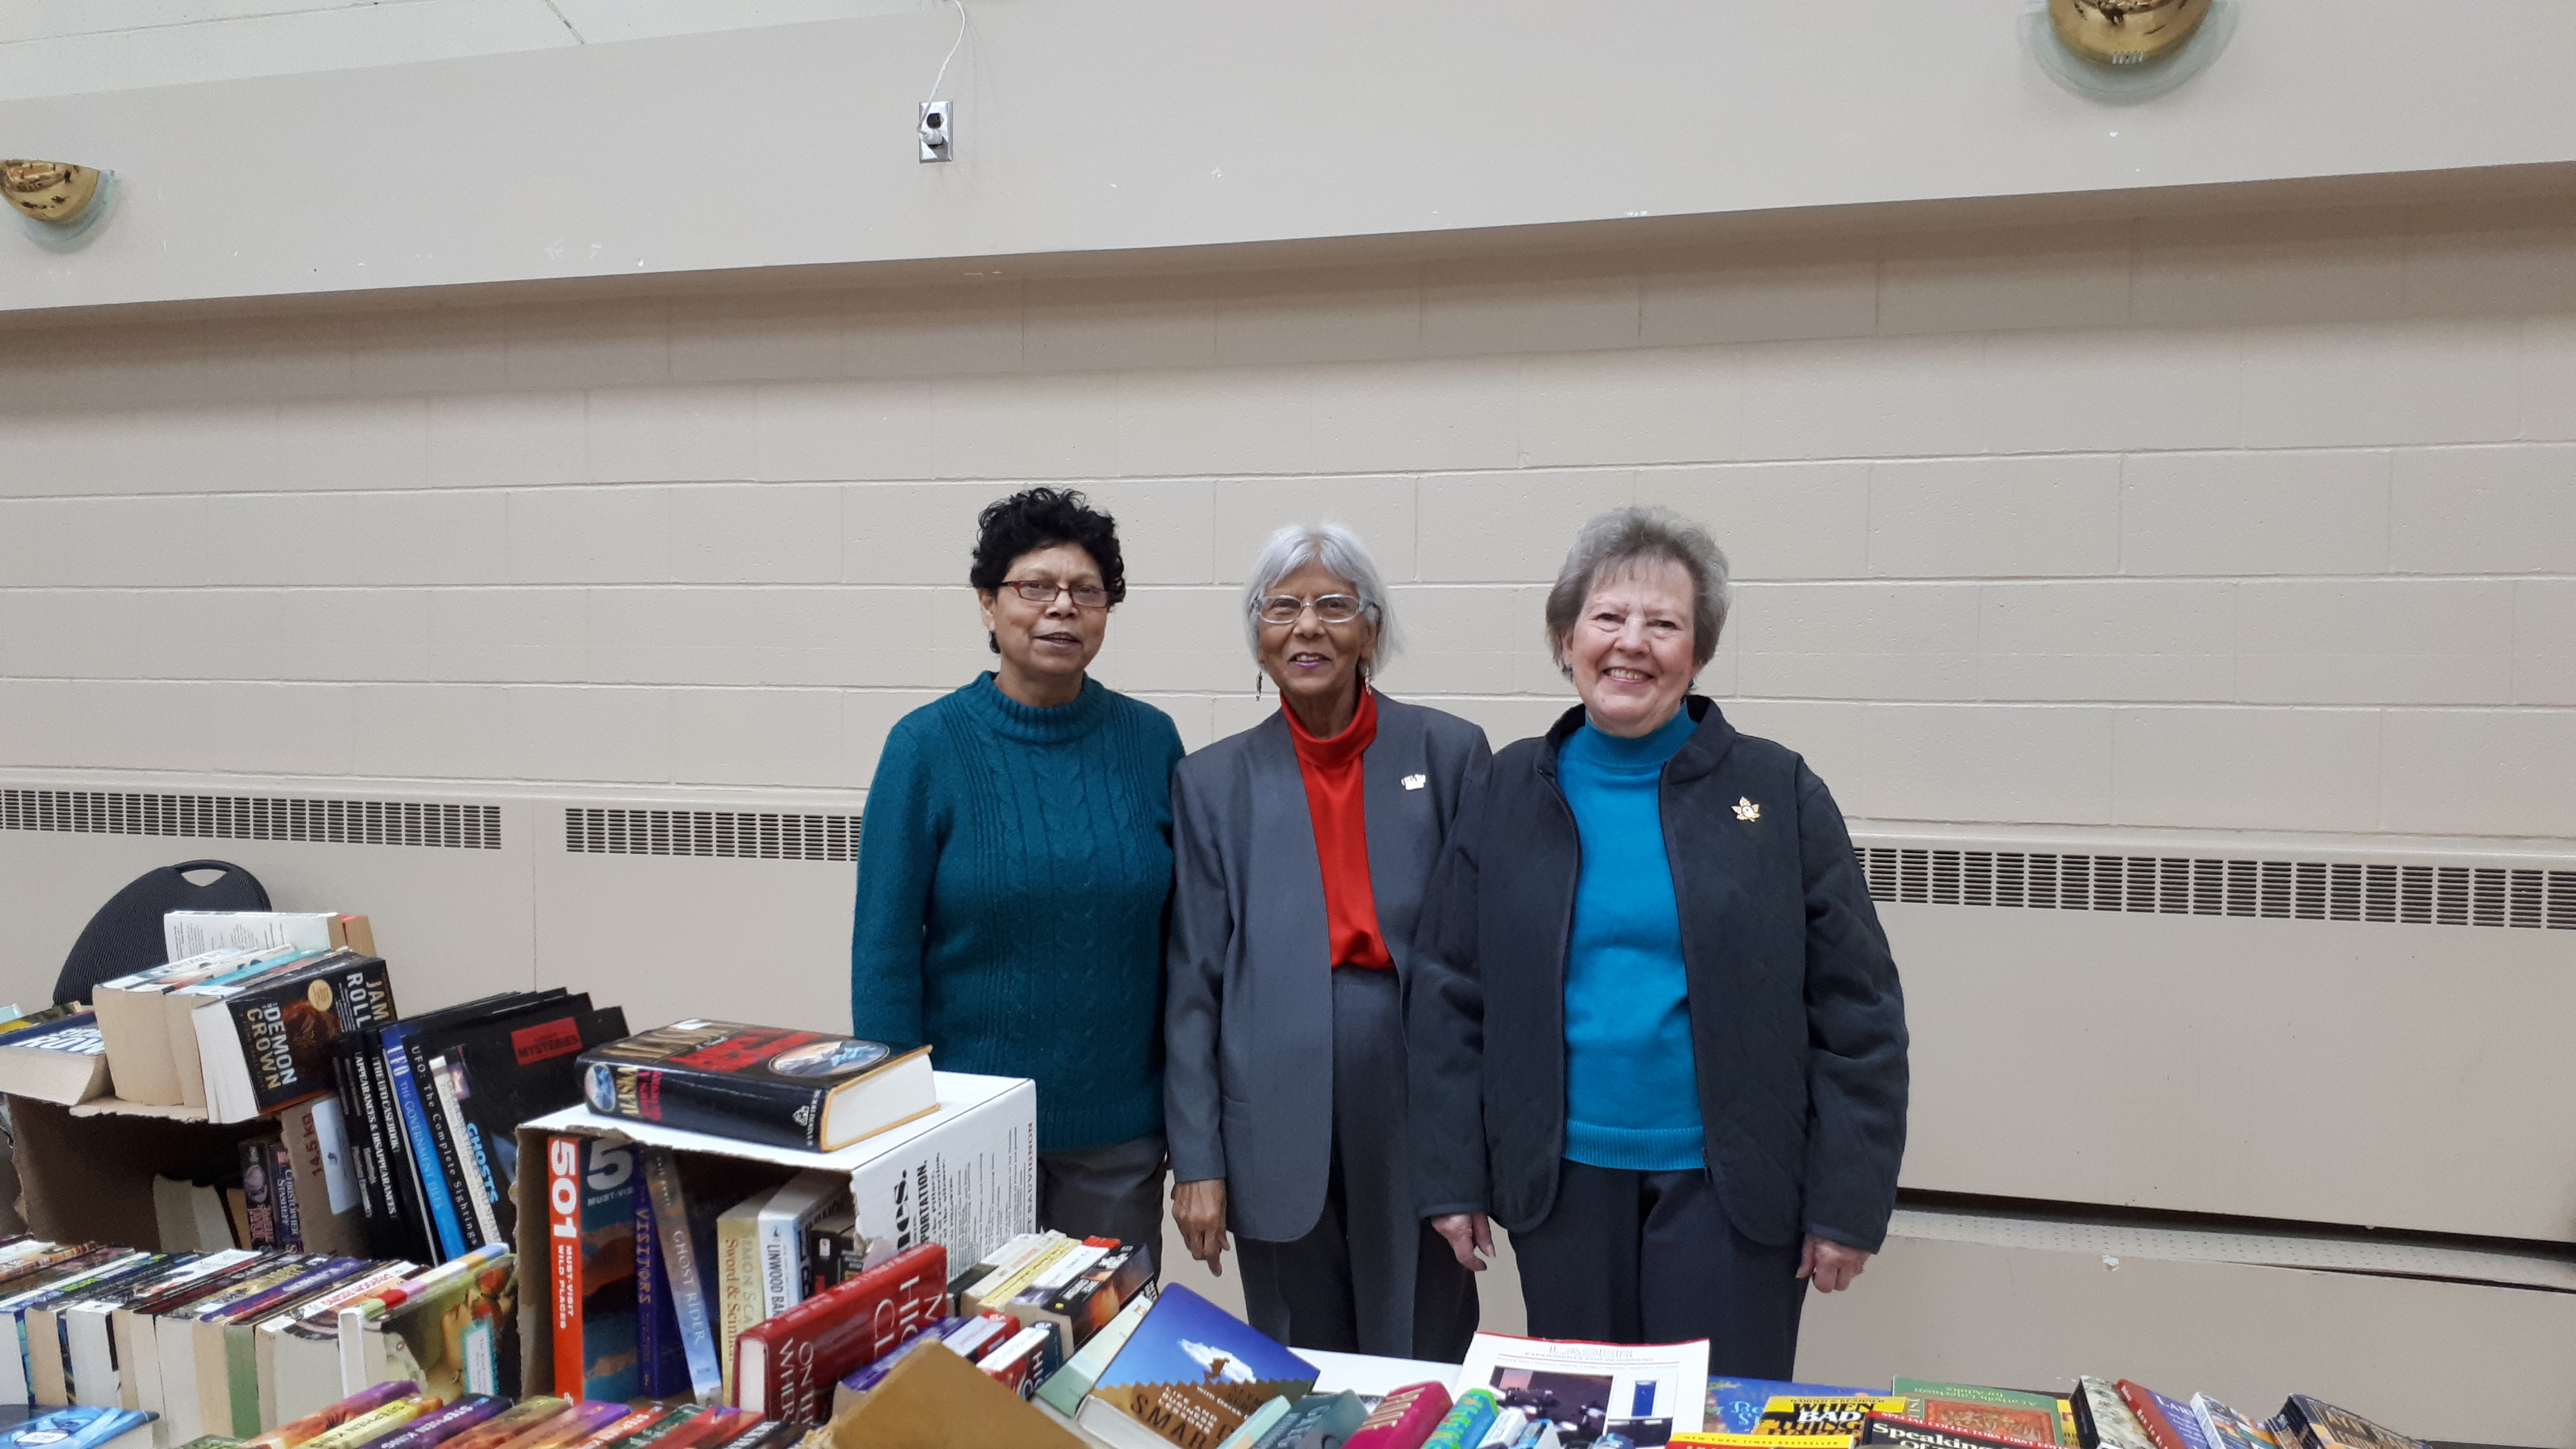 cwl members helping at the book table